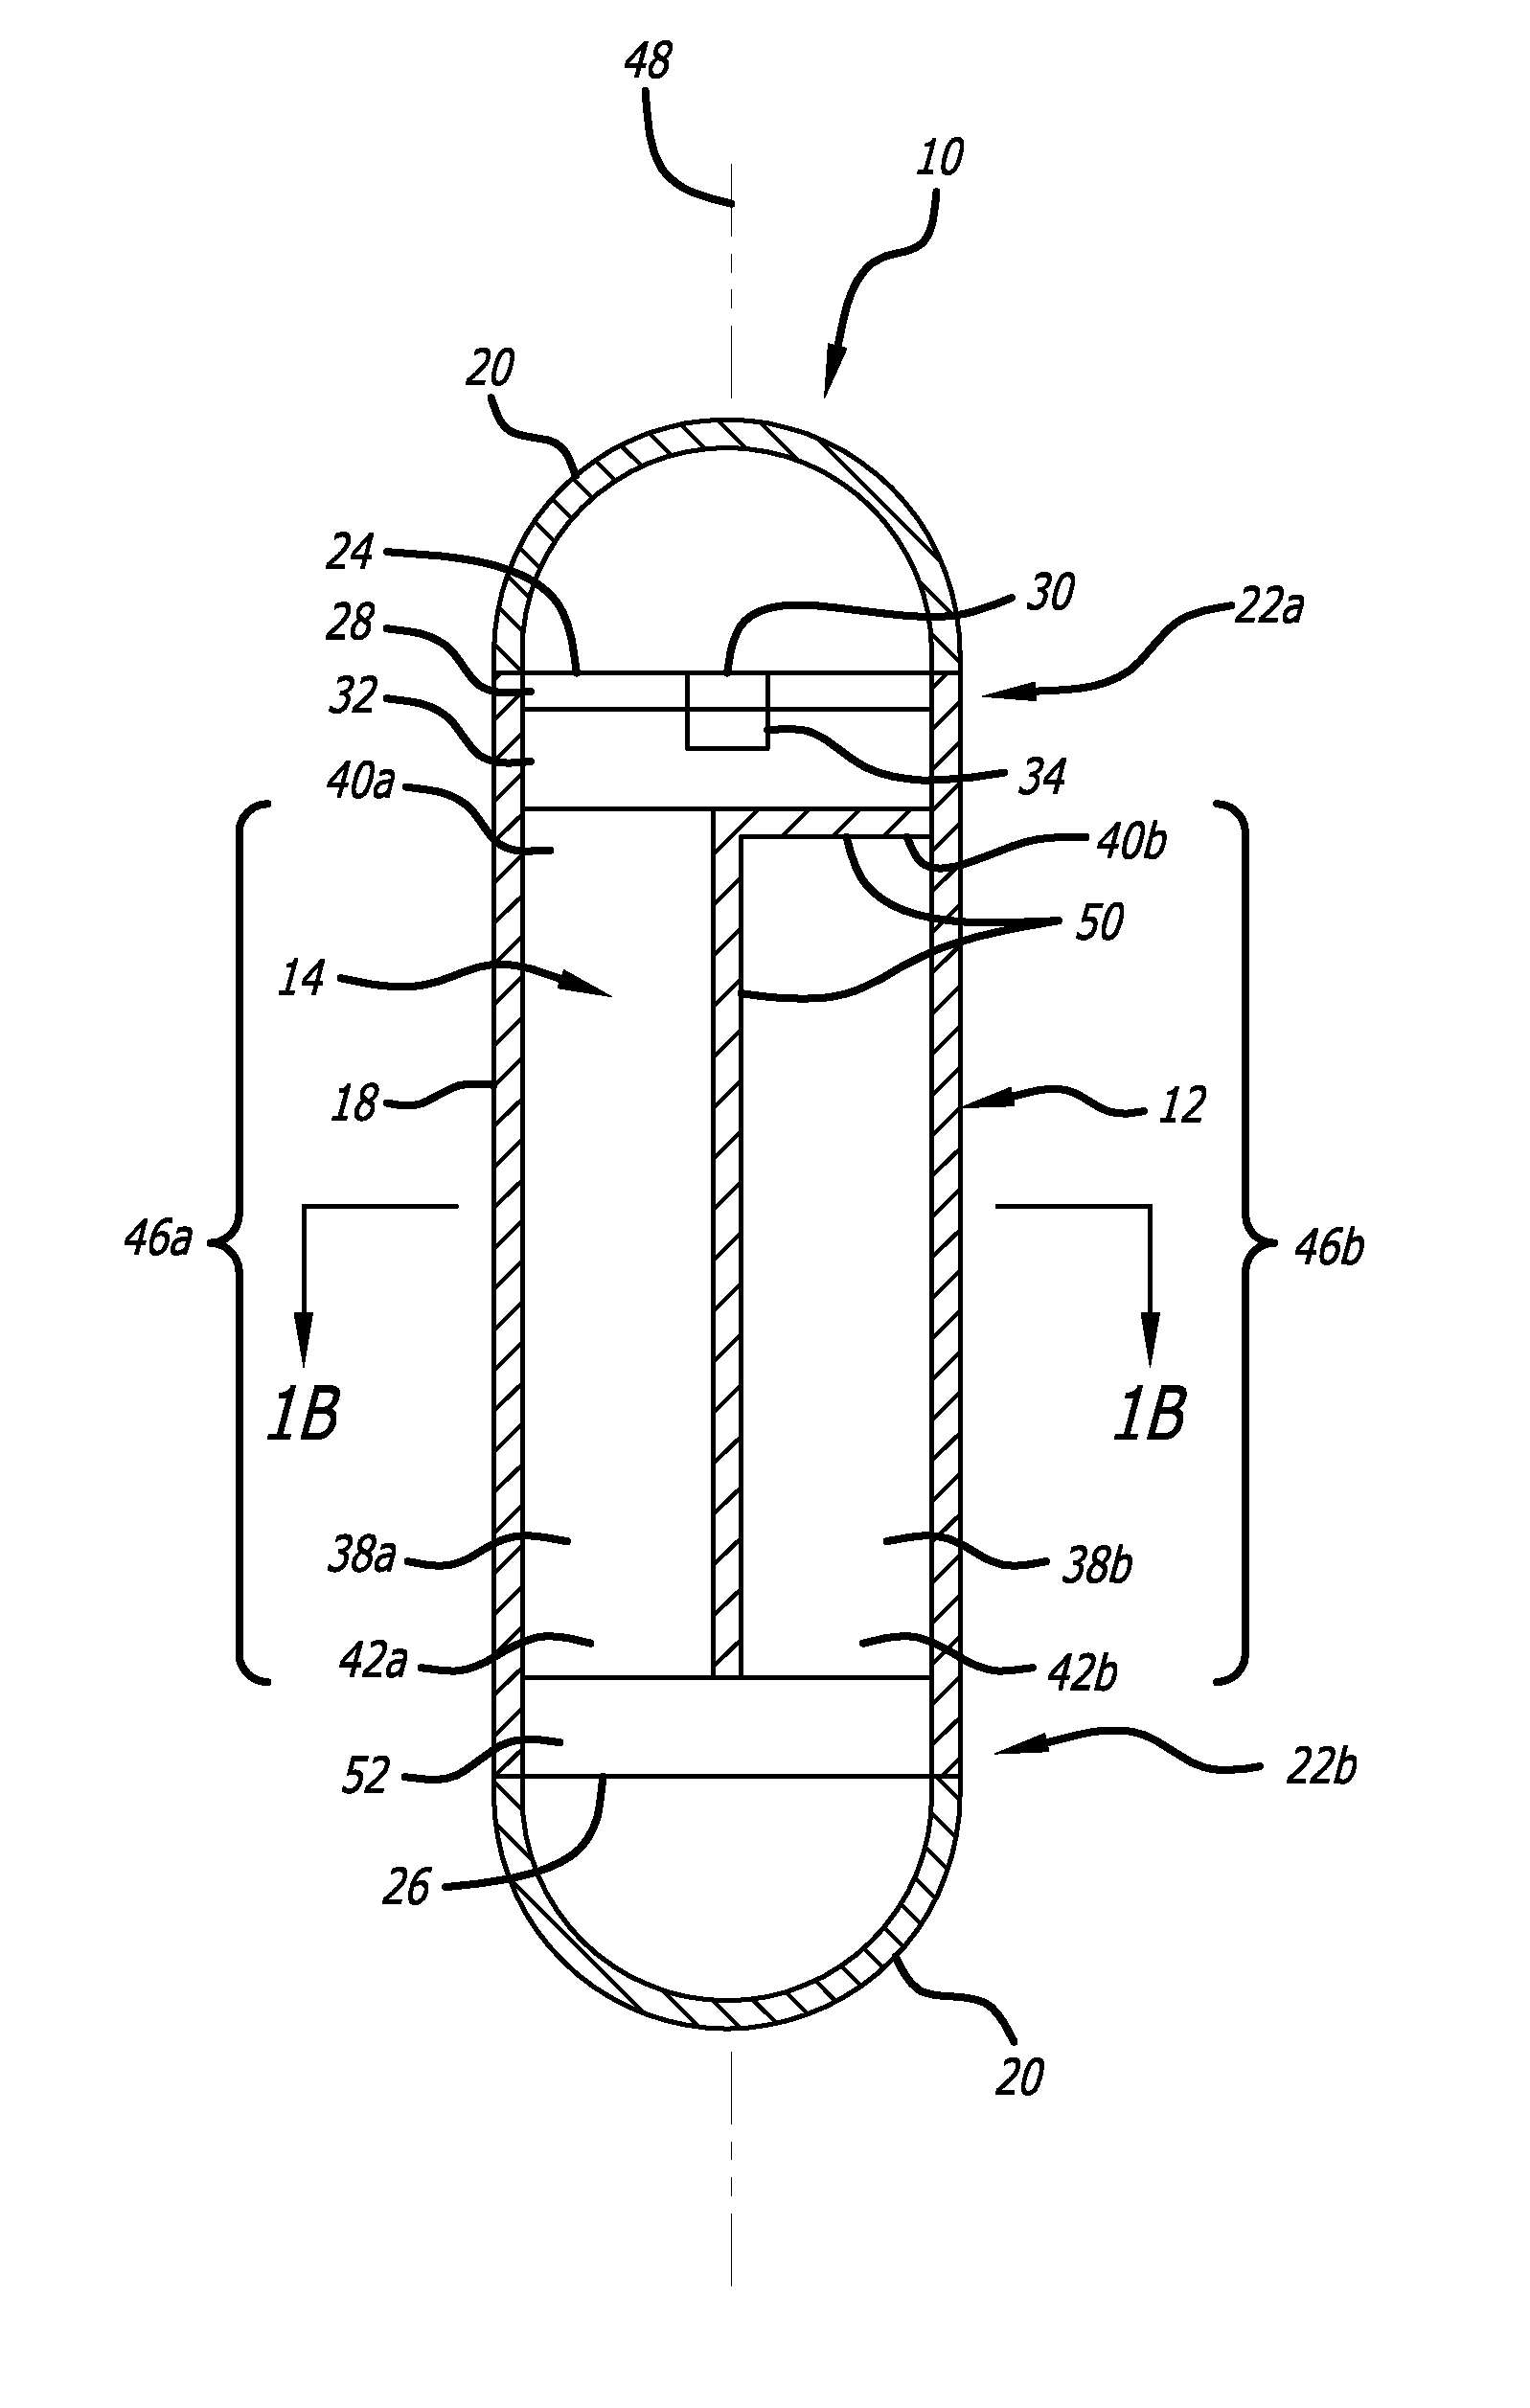 Chemical oxygen generator with chemical cores arranged in parallel